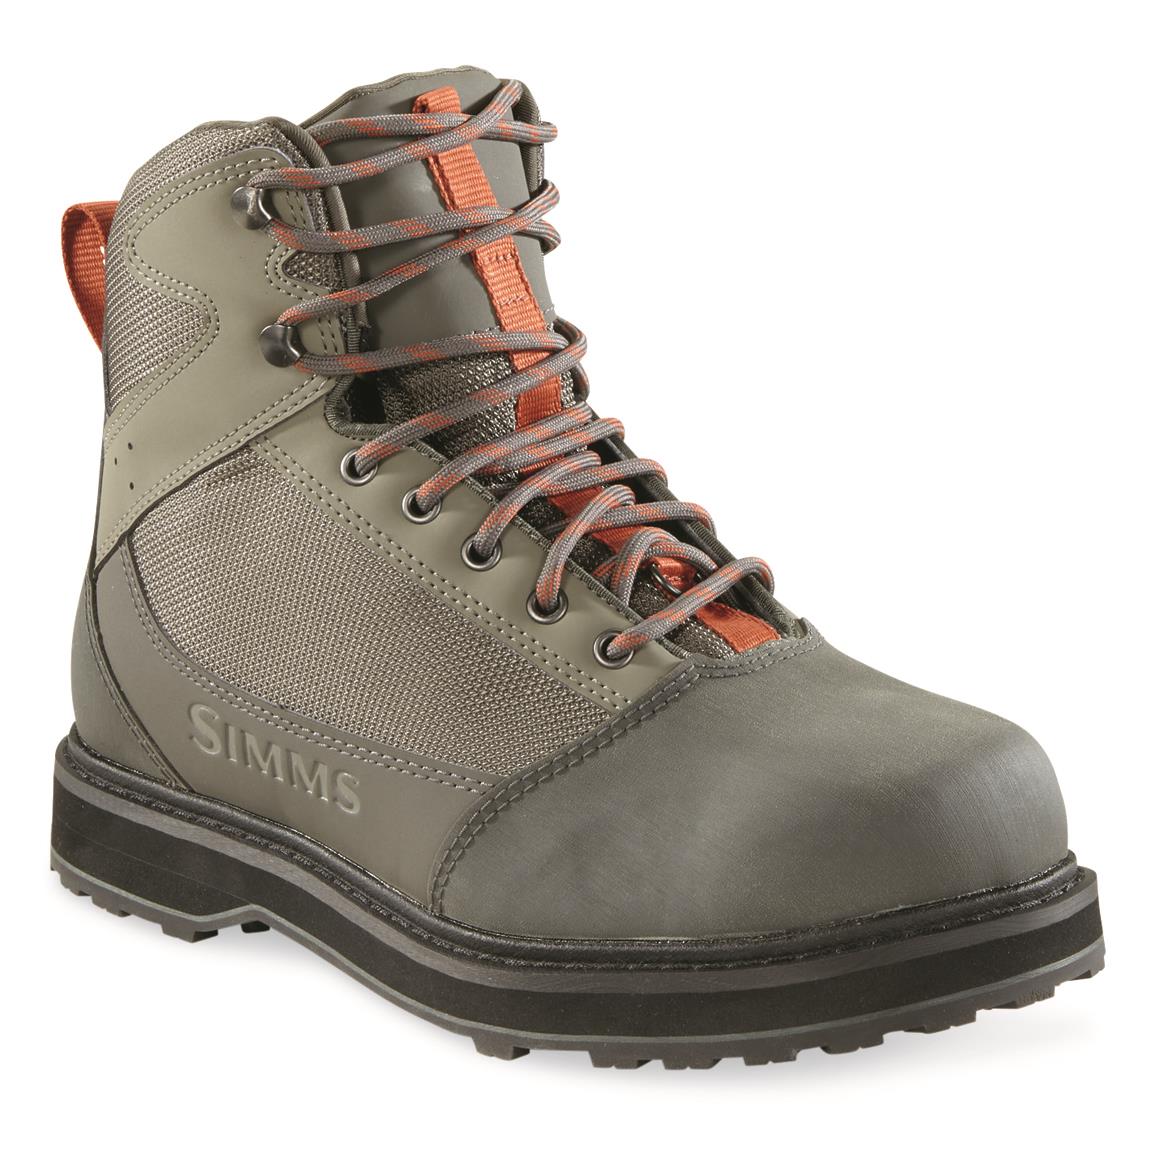 Simms Unisex Tributary Wading Boots, Rubber Soles, Basalt